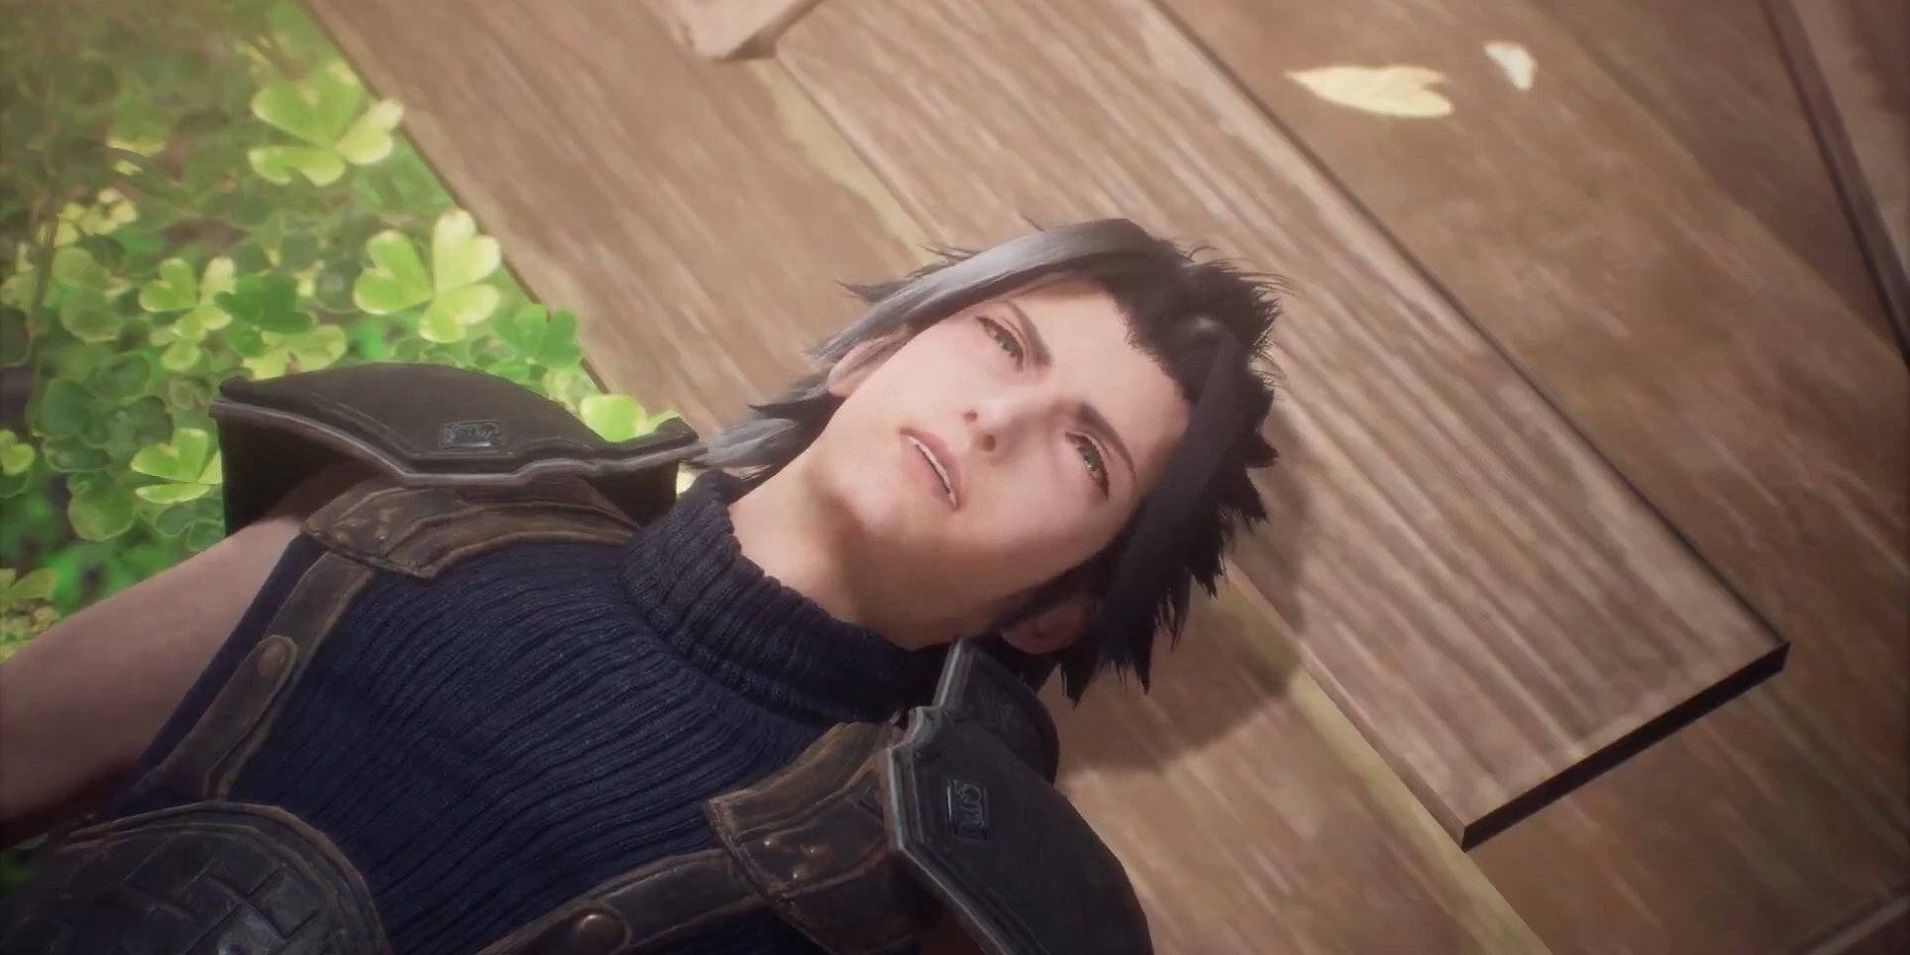 Zack Fair after he fell into Aerith's church in Crisis Core: Final Fantasy 7 Reunion, laying on a field of clovers, with his head on a wooden floor.